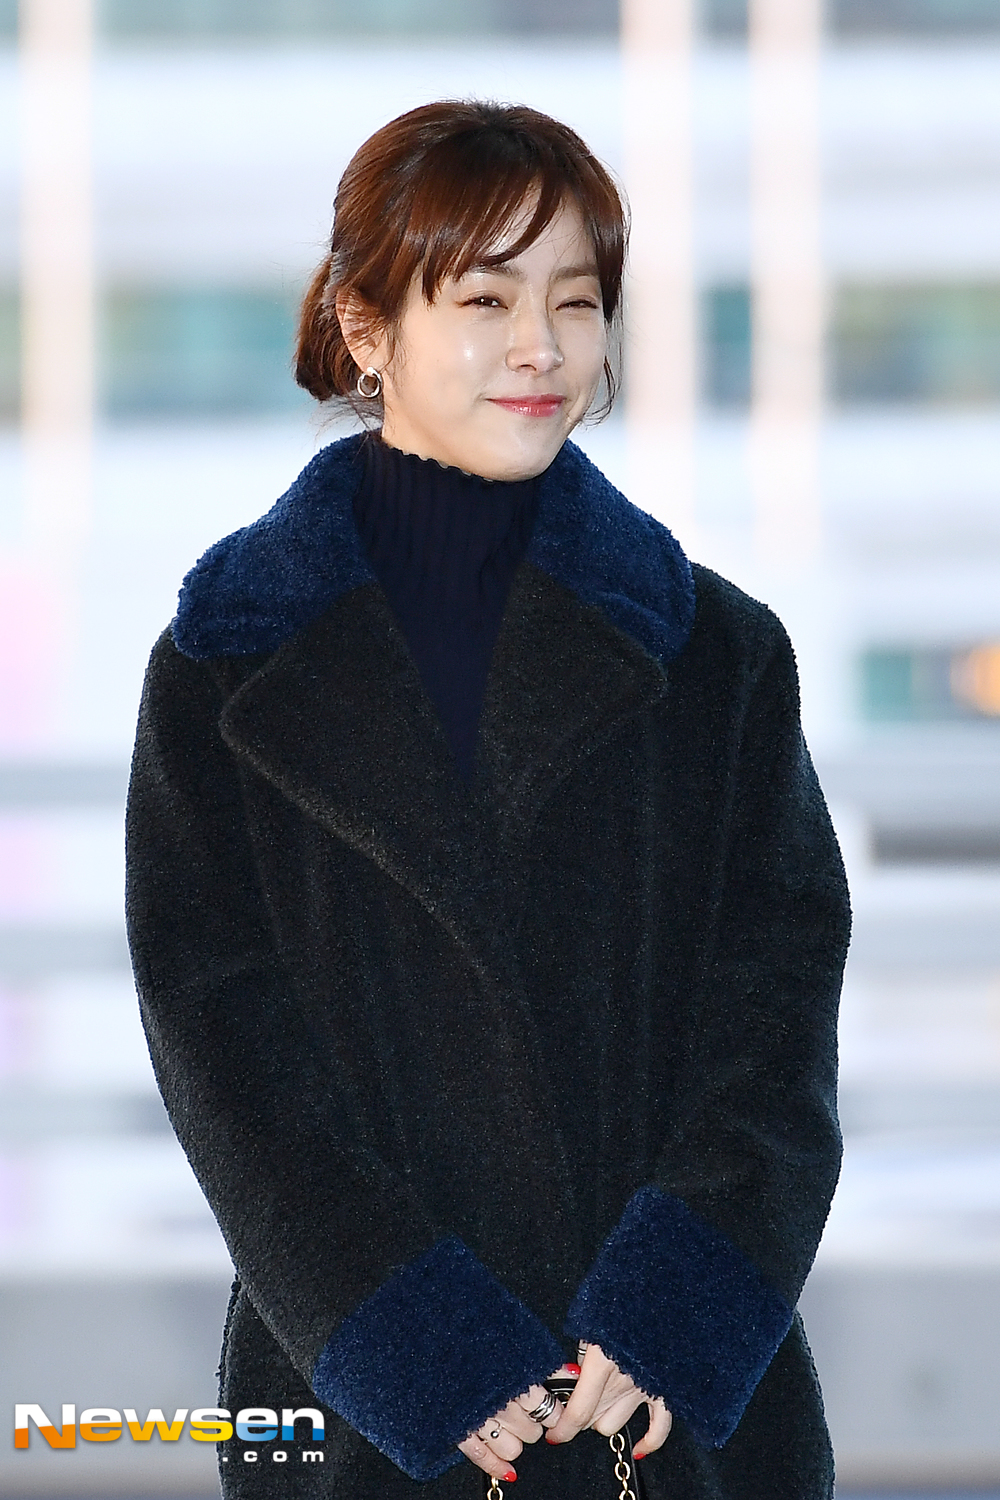 <p>Actress Han Ji-min This 1 31 PM Incheon Jung-operation in Incheon International Airport through the ‘New York Asian Film Festival(NYAFF)‘ attend Car New York, USA as departure.</p><p>Actress Han Ji-min, this airport fashion and New York as departure.</p>